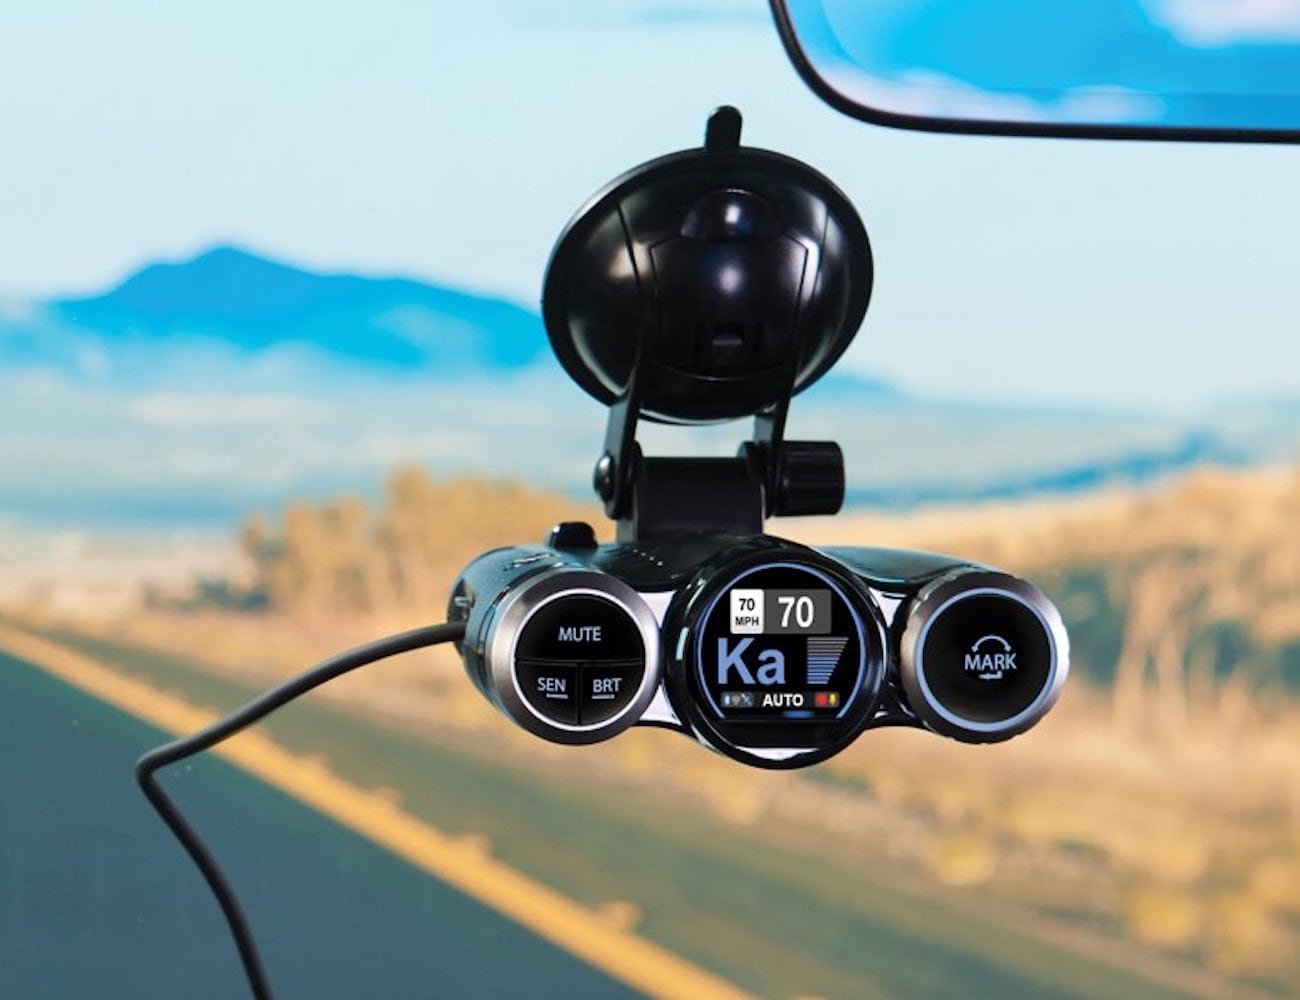 Cobra Road Scout Radar-Detecting Dash Cam monitors and alerts you about road threats